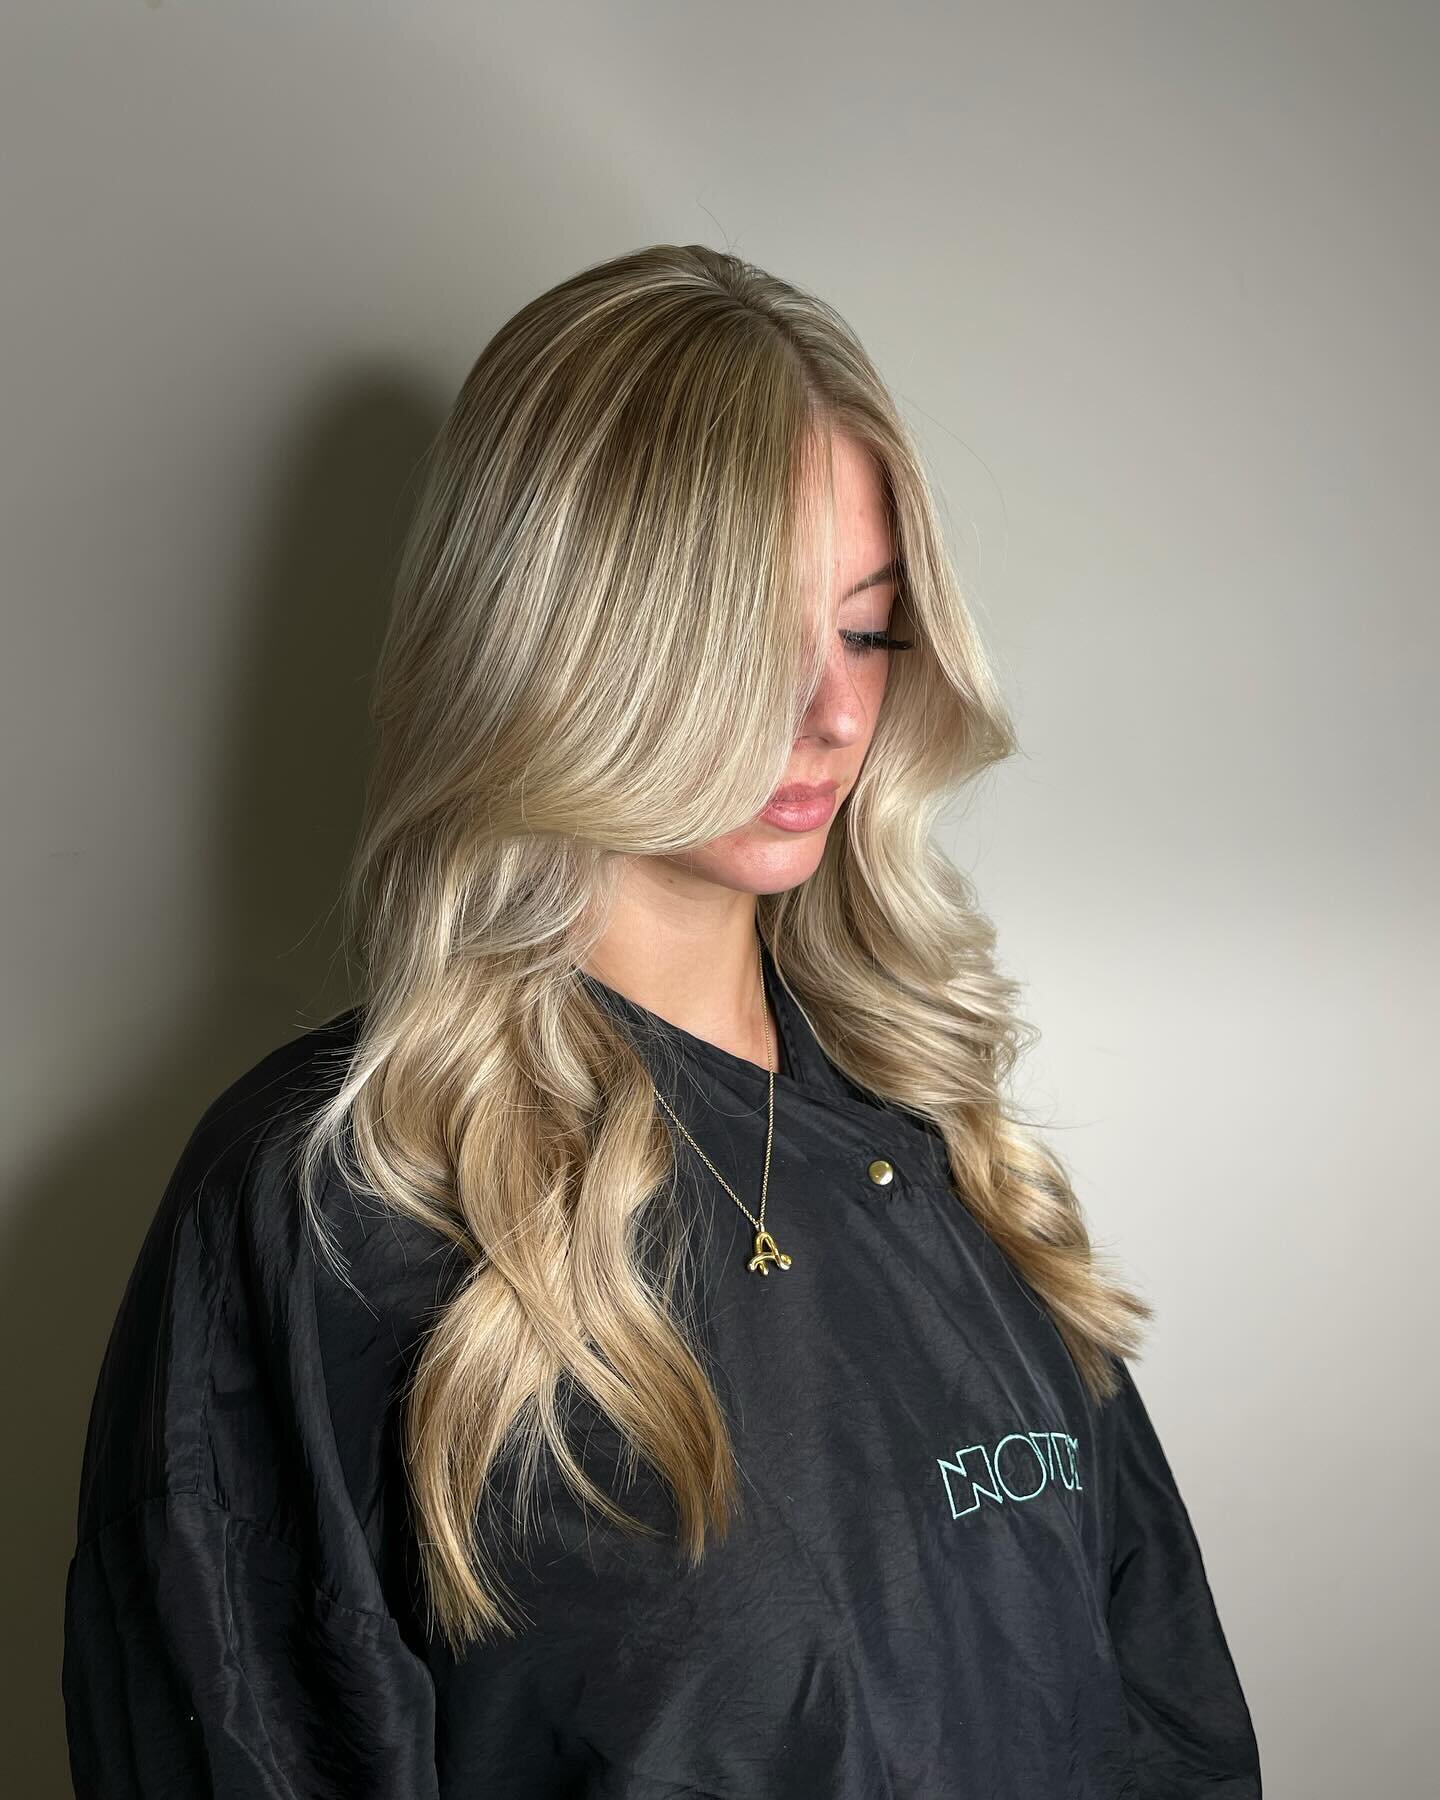 Our client Abi has been taking her hair darker over the winter months, but we decided it&rsquo;s time to go lighter for the warmer months ahead. This process takes a while, so now is the perfect time to start gradually going lighter ready for the sum